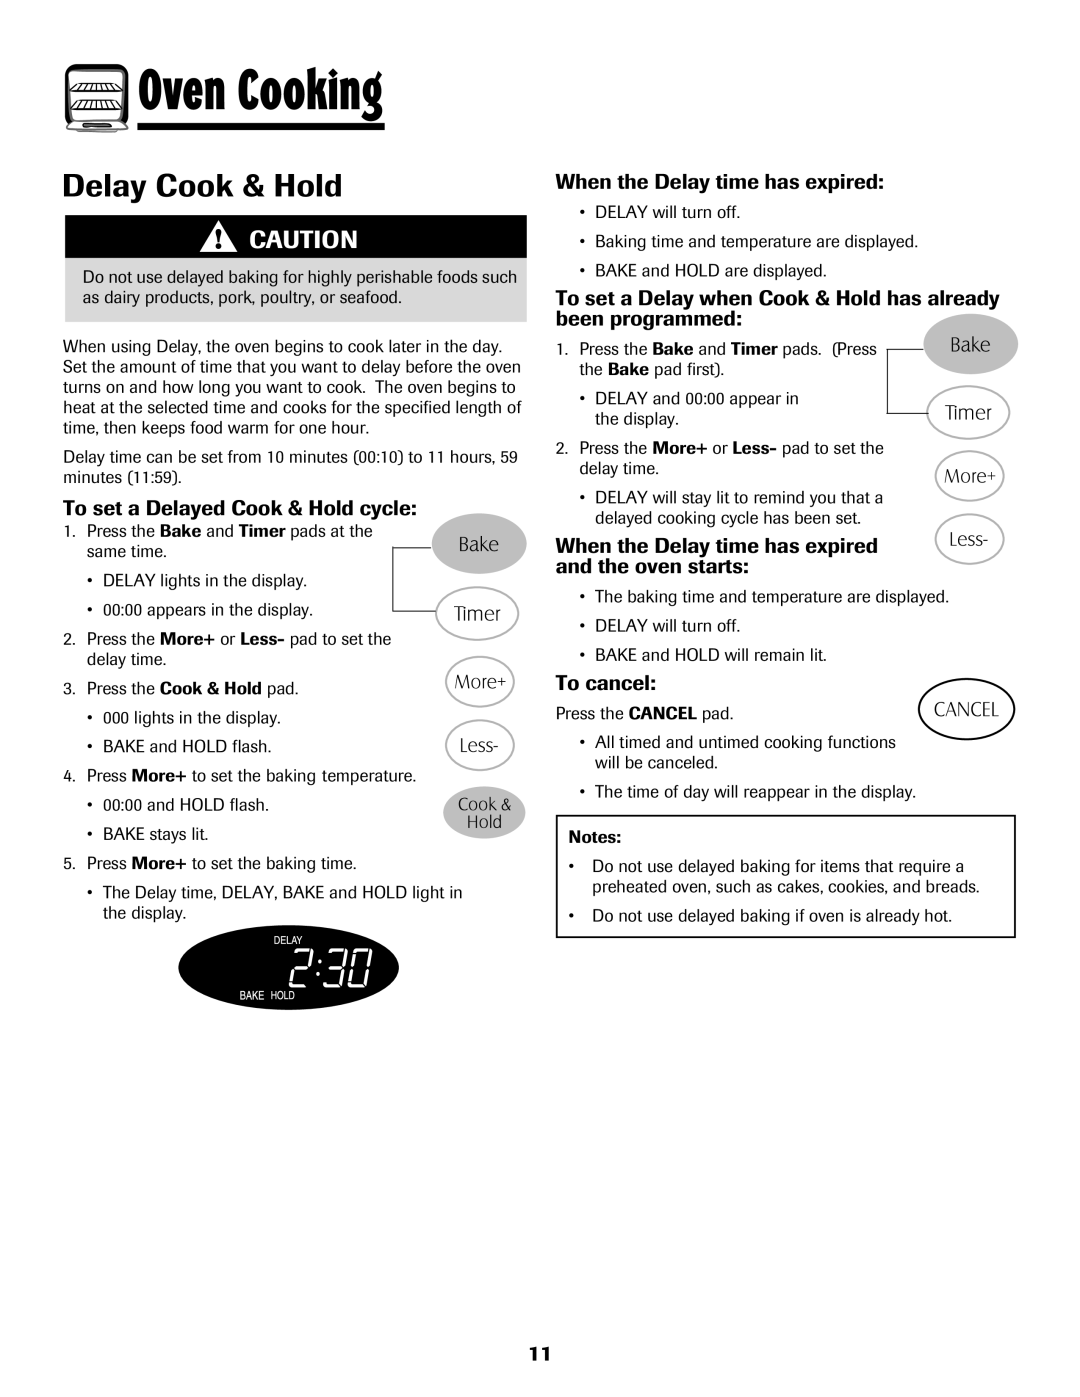 Maytag 700 Delay Cook & Hold, To set a Delayed Cook & Hold cycle, When the Delay time has expired, To cancel, Oven Cooking 